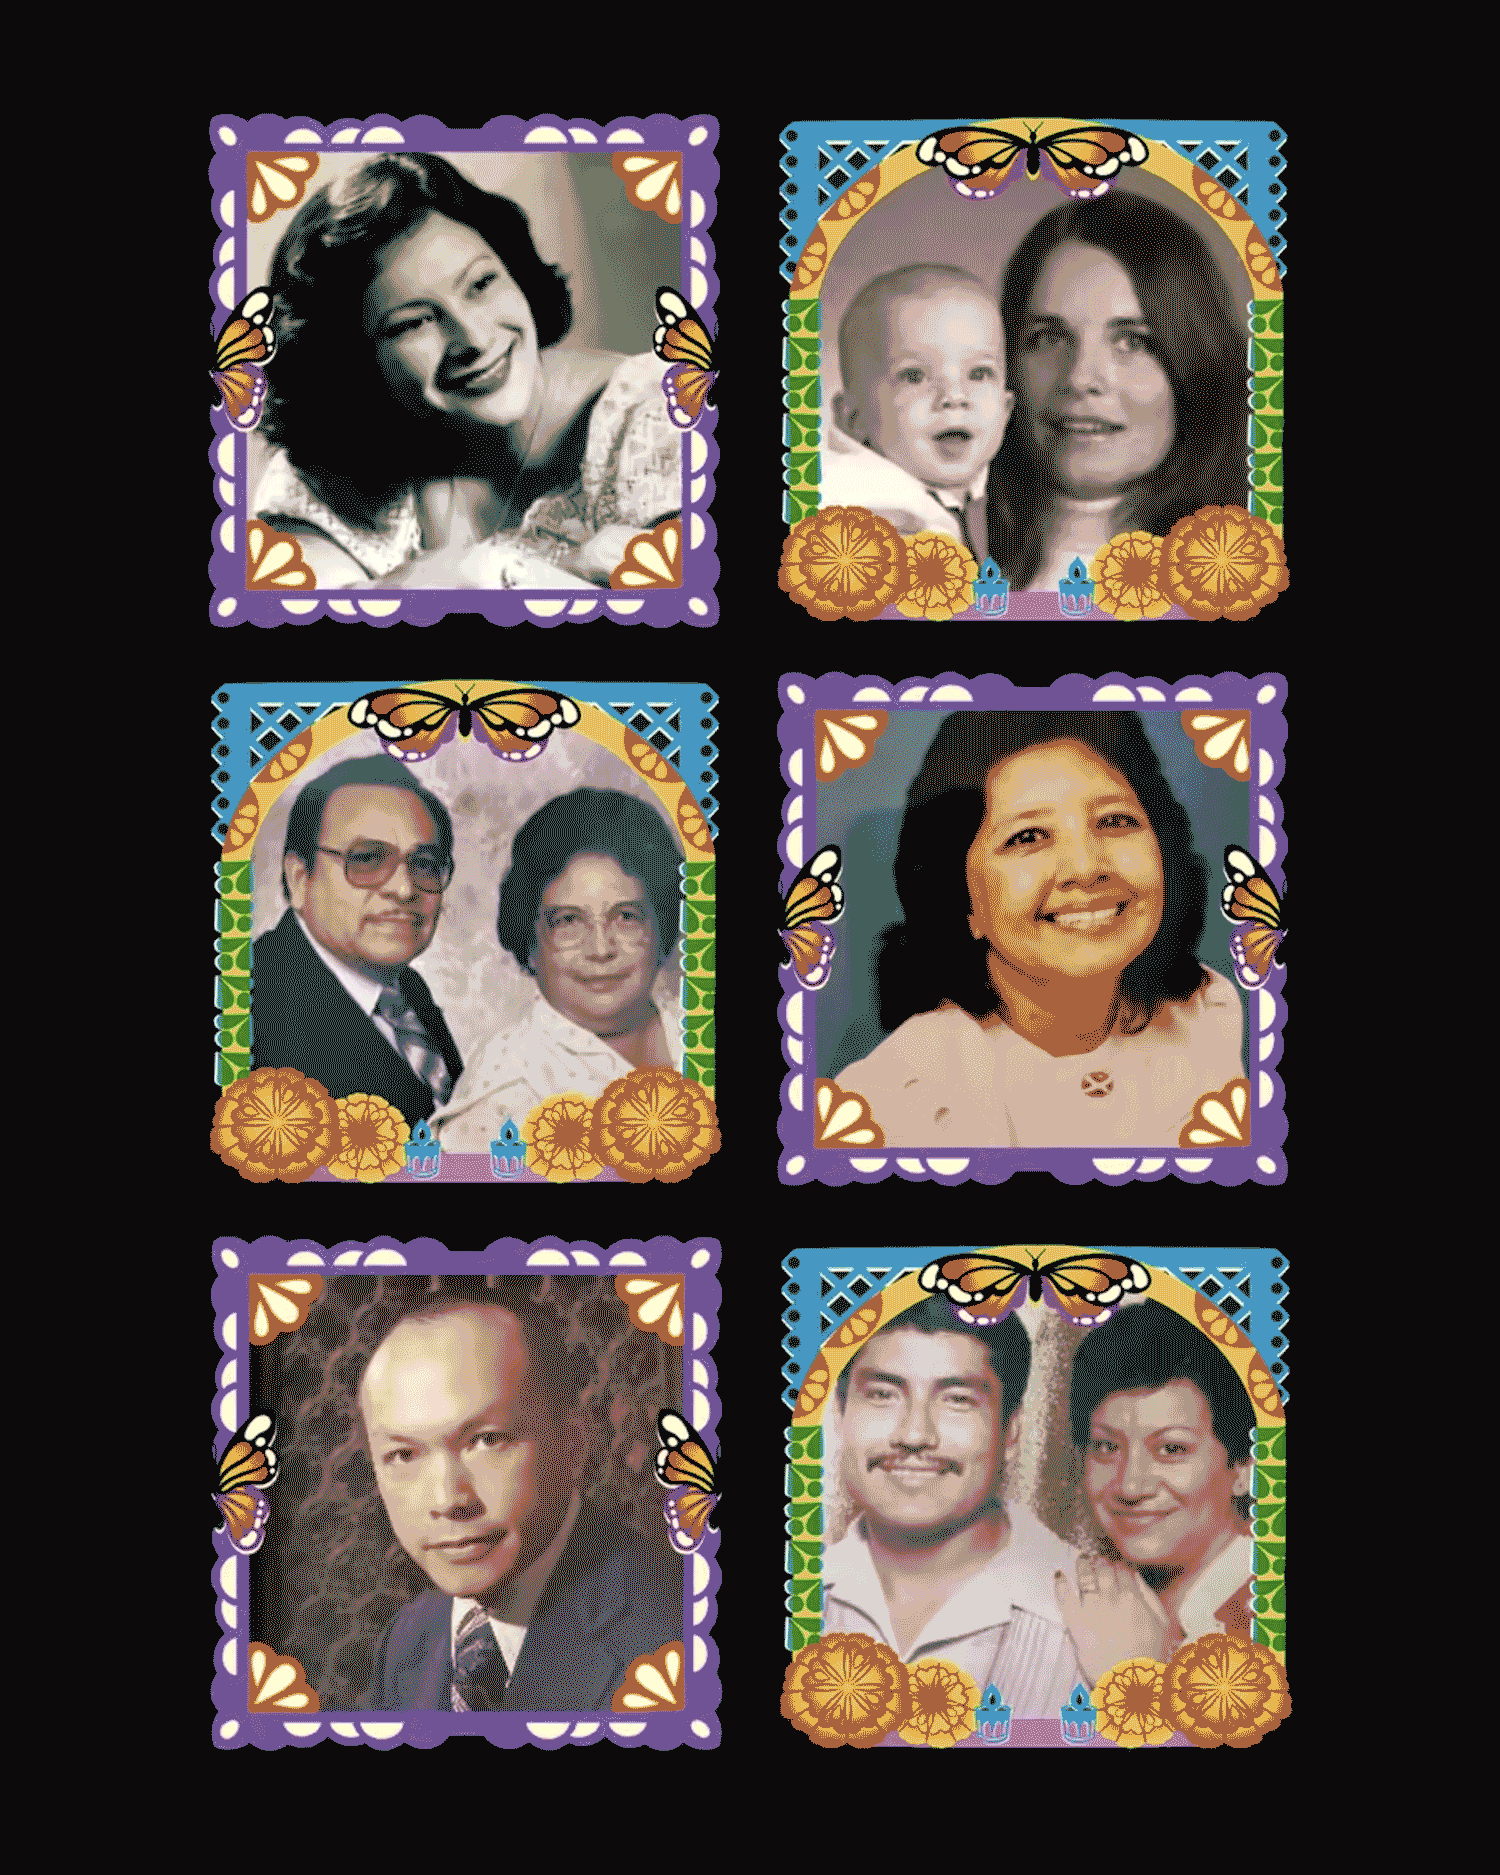 Photos of loved ones submitted to the digital ofrenda 